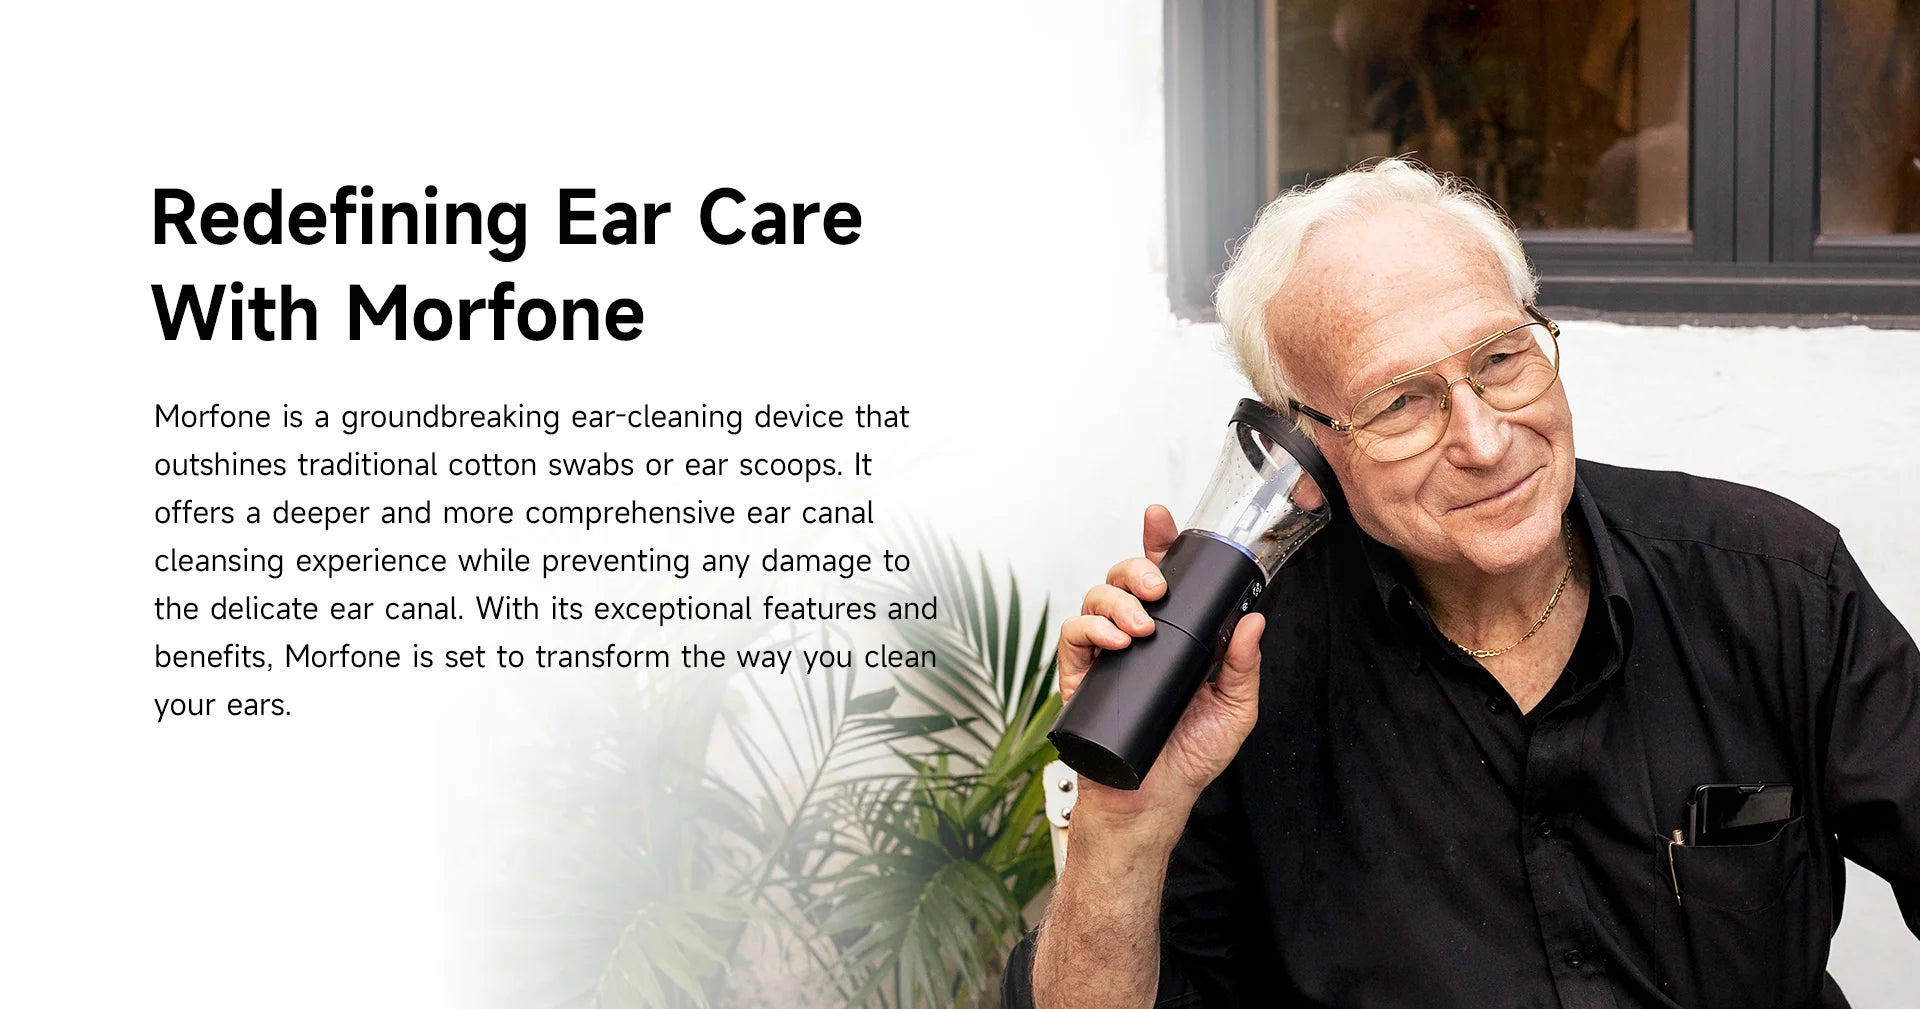 Redefining Ear Care With Morfone - A groundbreaking ear-cleaning device revolutionizing ear hygiene.